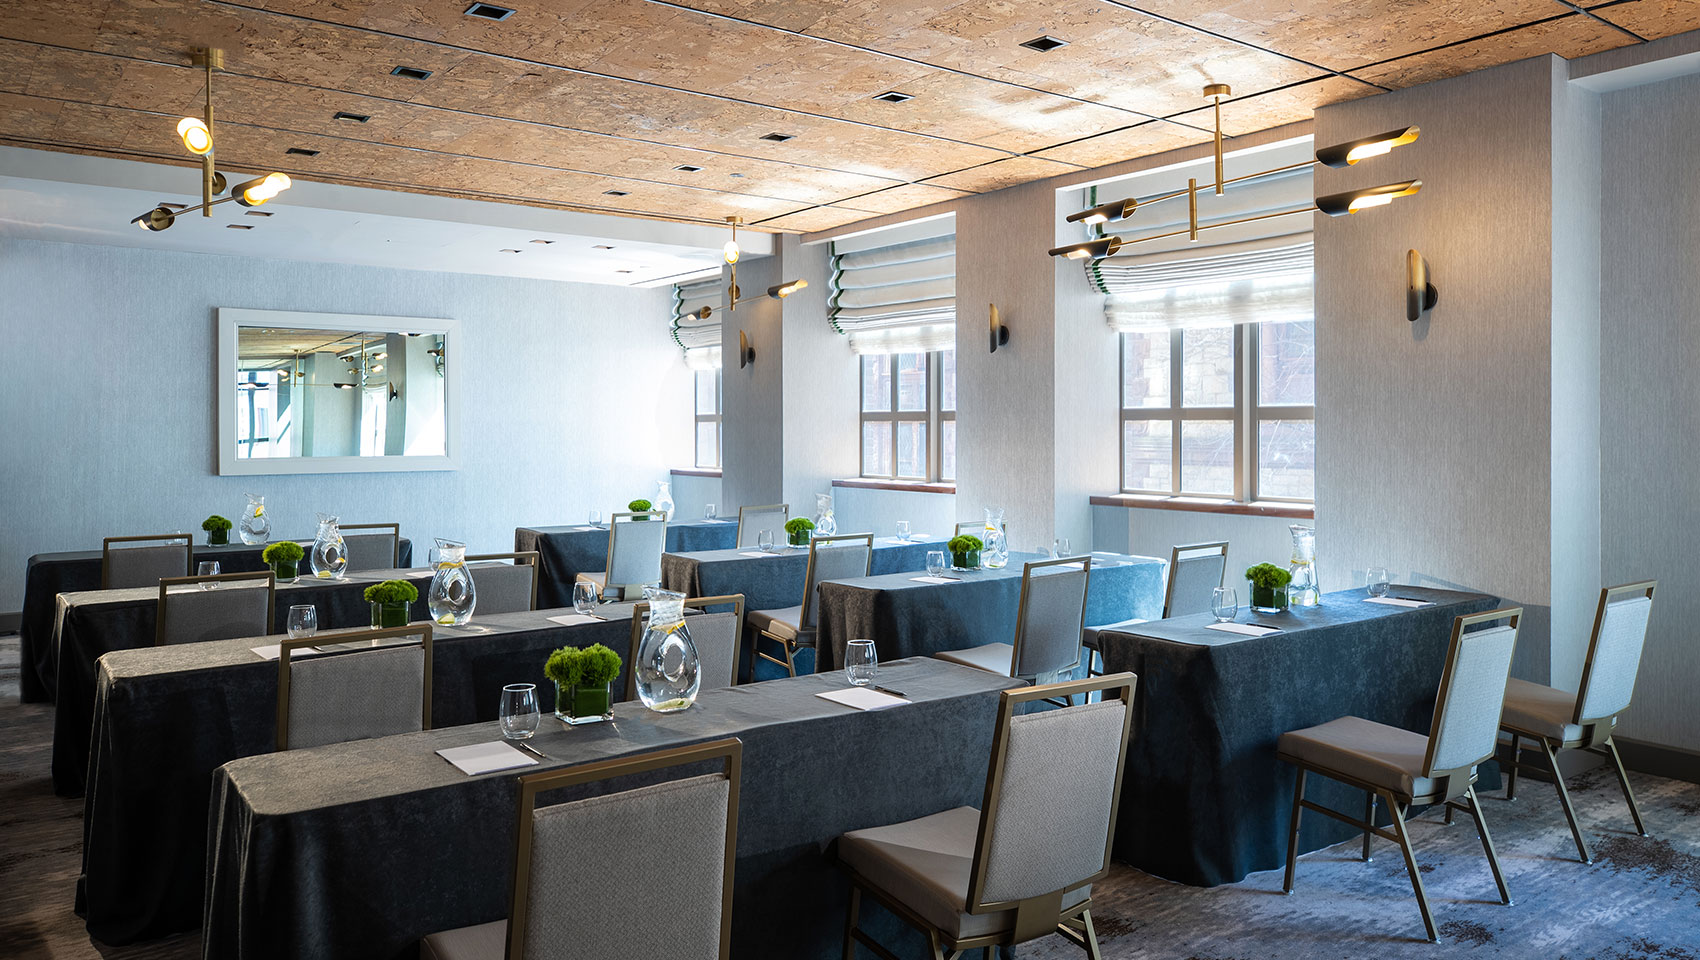 Tyng classroom setup at Kimpton Hotel Palomar Philadelphia showing long tables with notepads on top facing the same direction located next to a wall with large sunlit windows